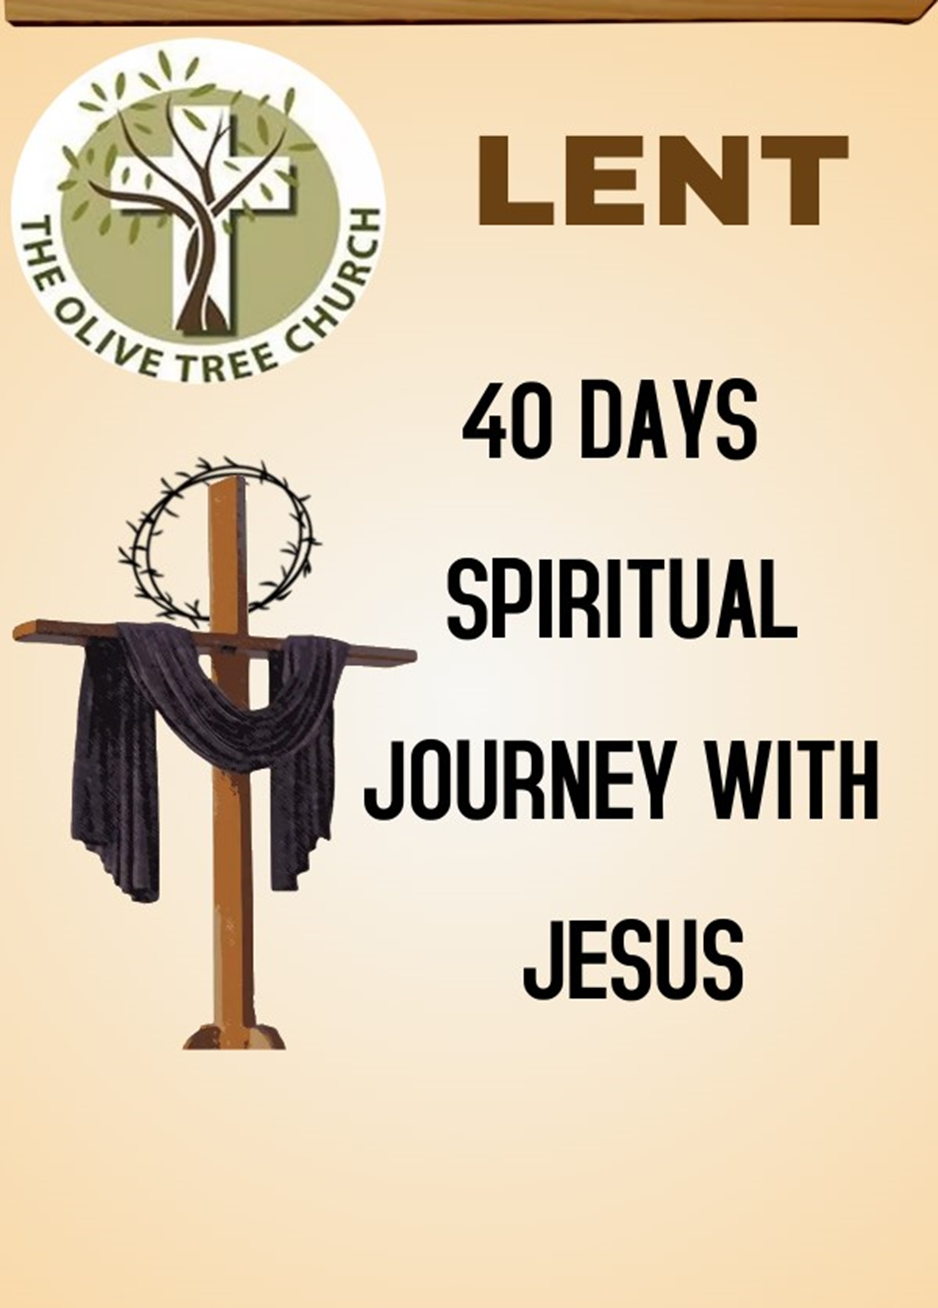 Lent Day 1 How to fast The Olive Tree Church, Luton